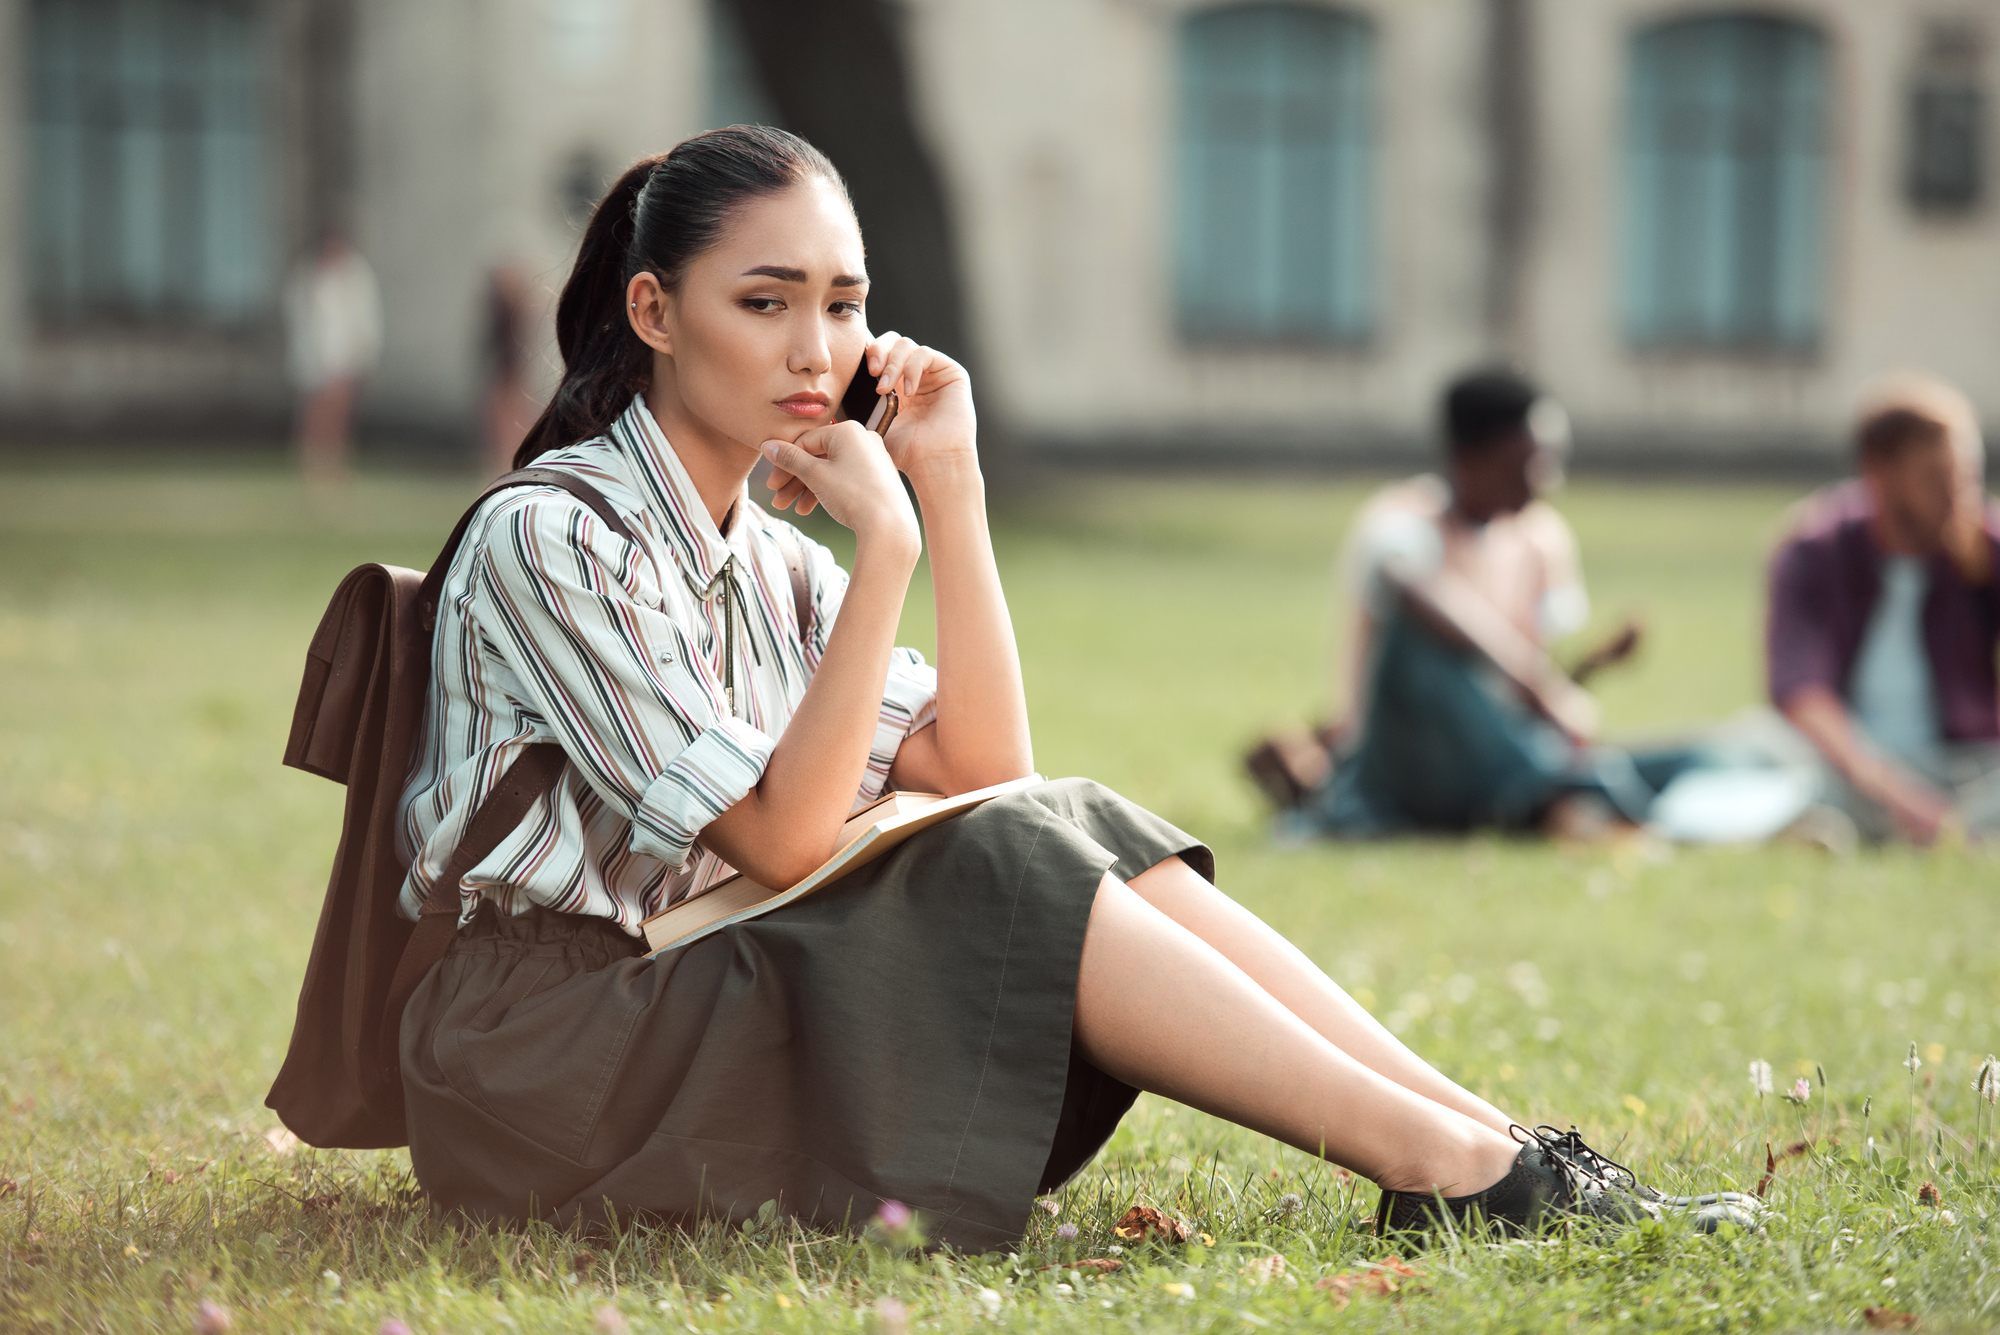 Upset female college student talks on cellphone while sitting on lawn